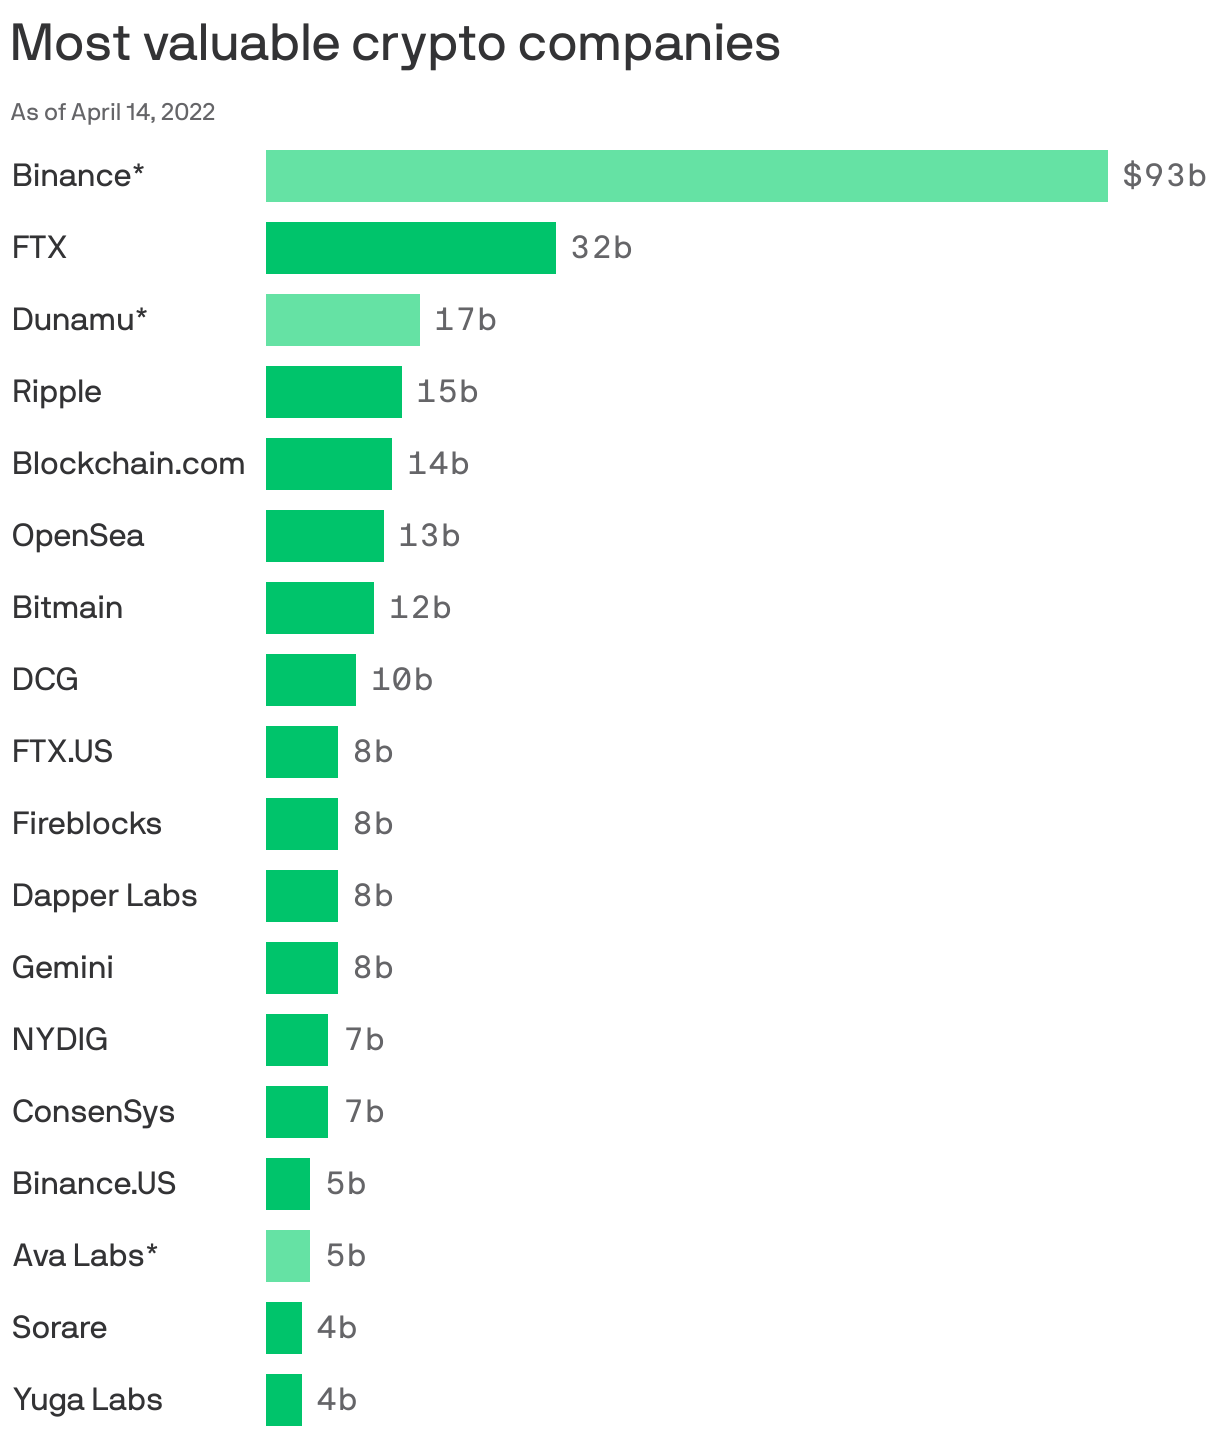 Most valuable crypto companies